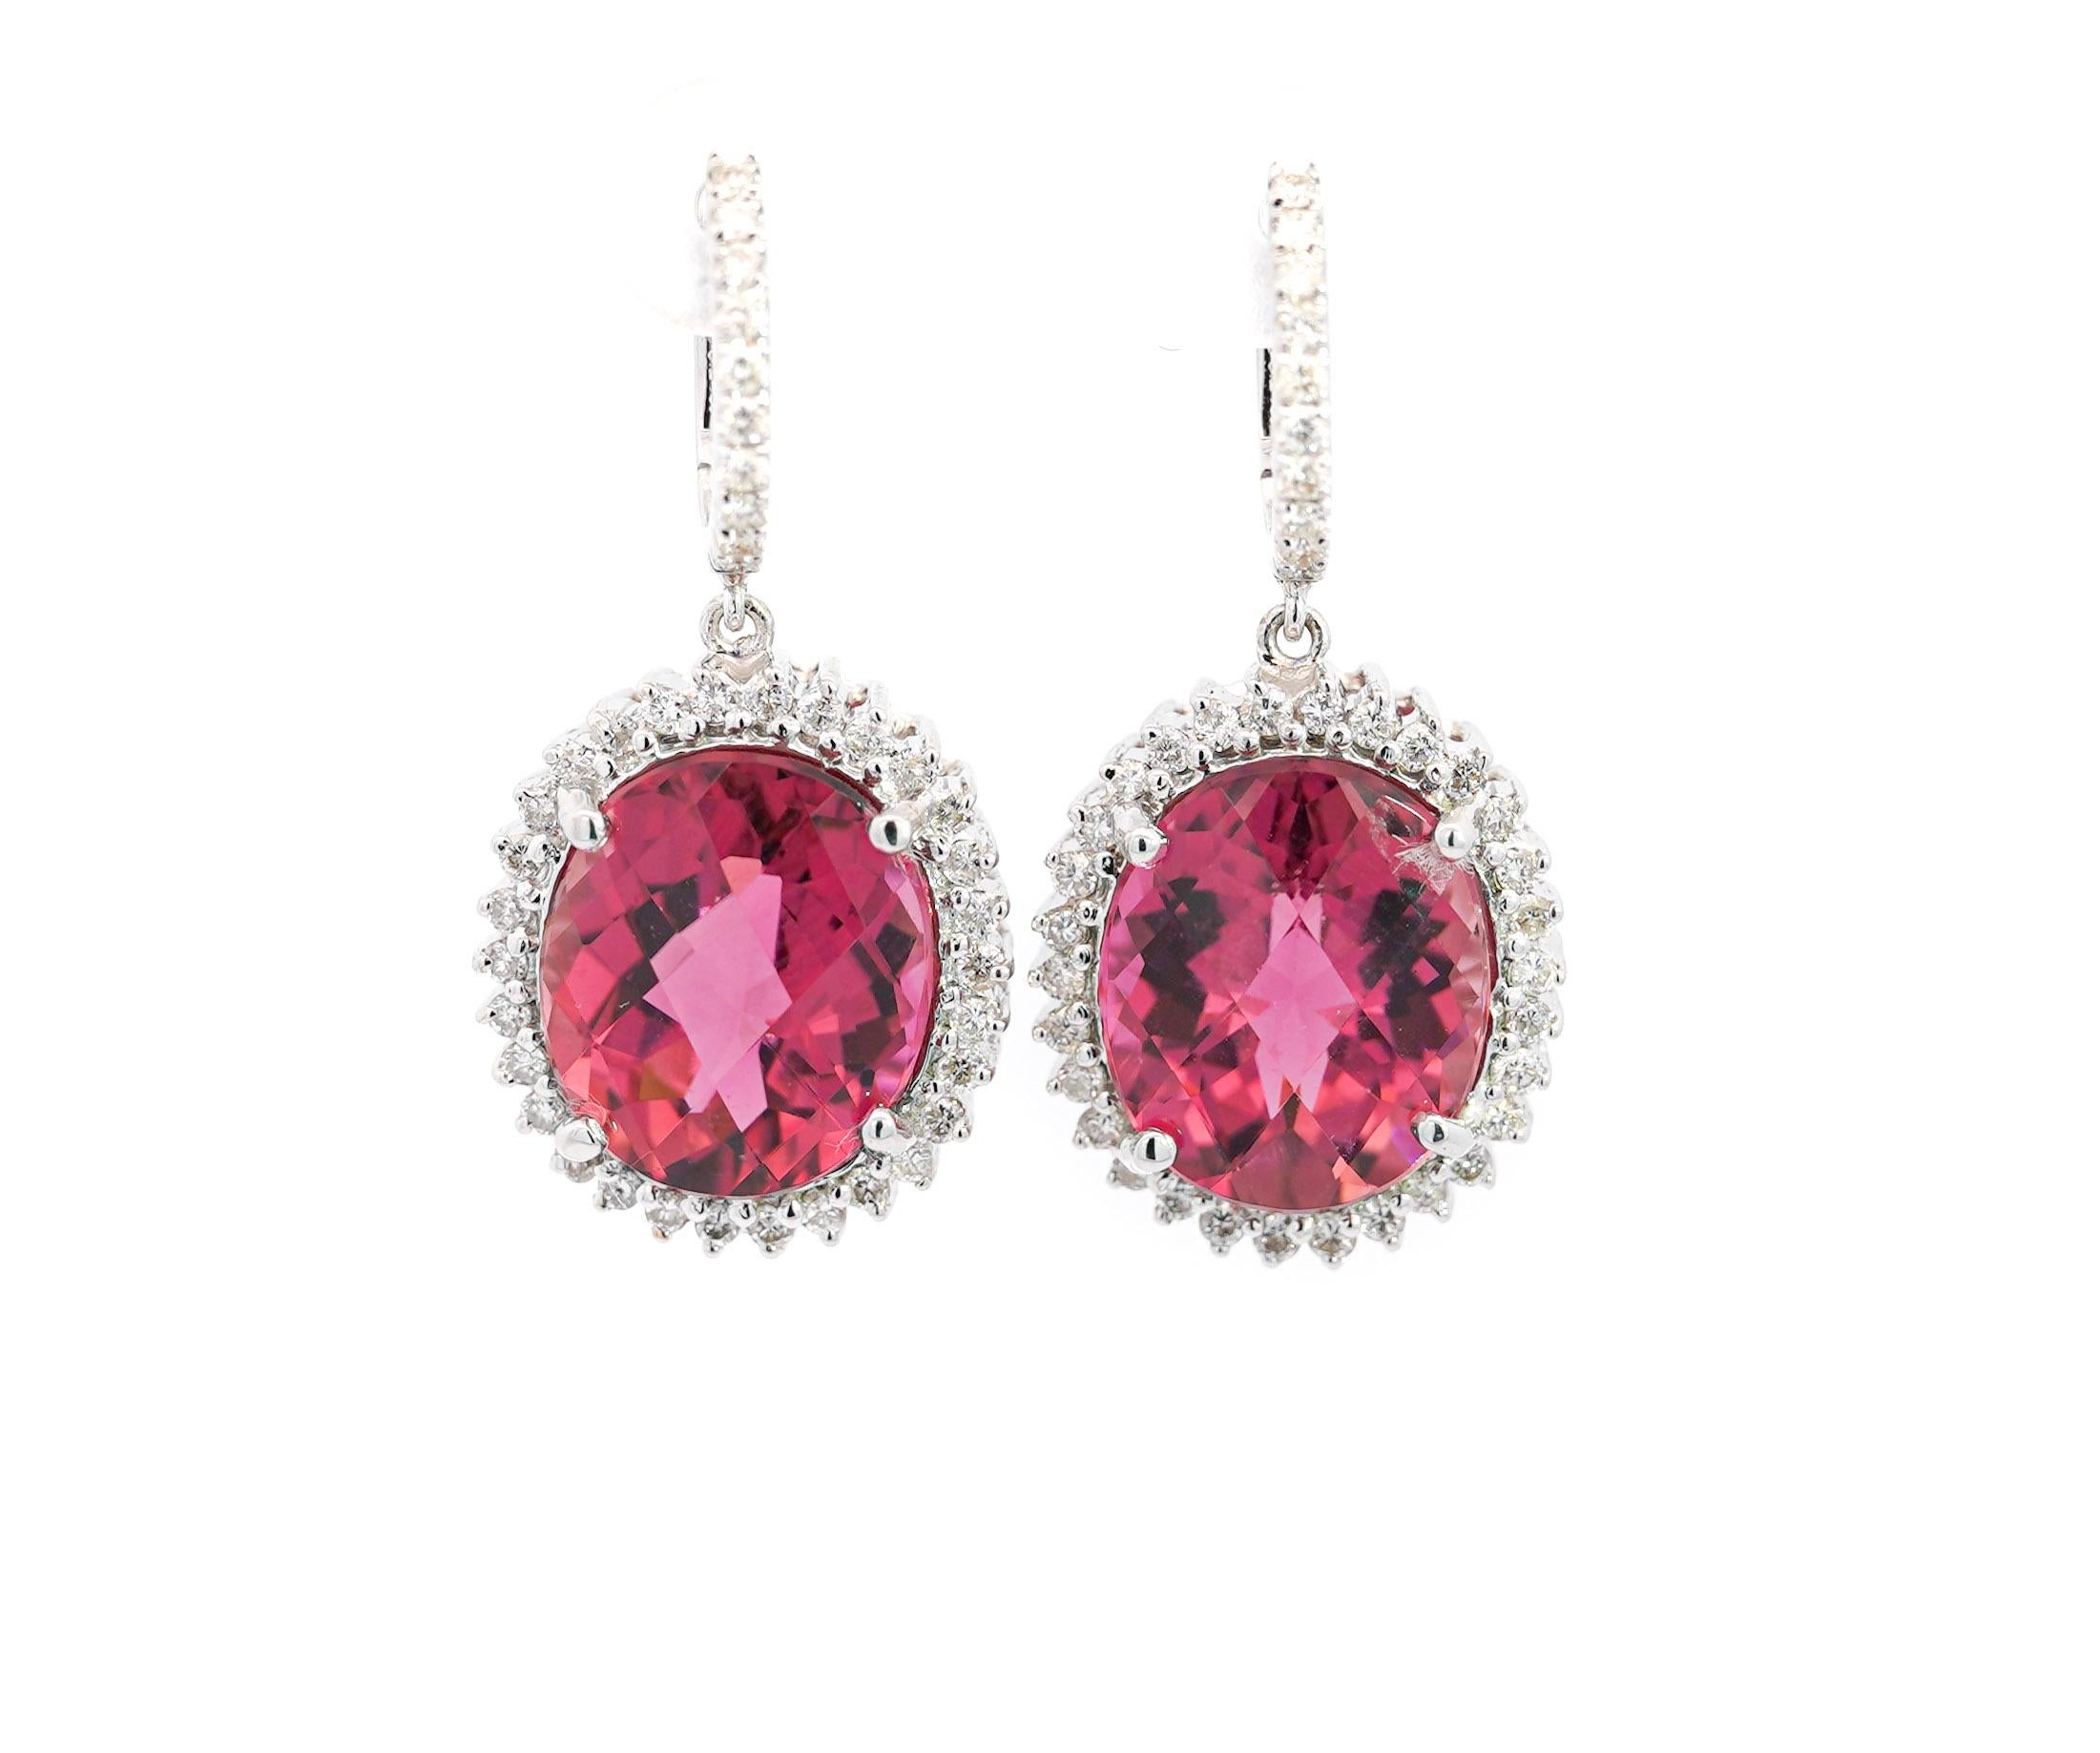 Art Deco 16 Carat Checkerboard Oval-Cut Pink Tourmaline and Diamond Halo Drop Earrings For Sale